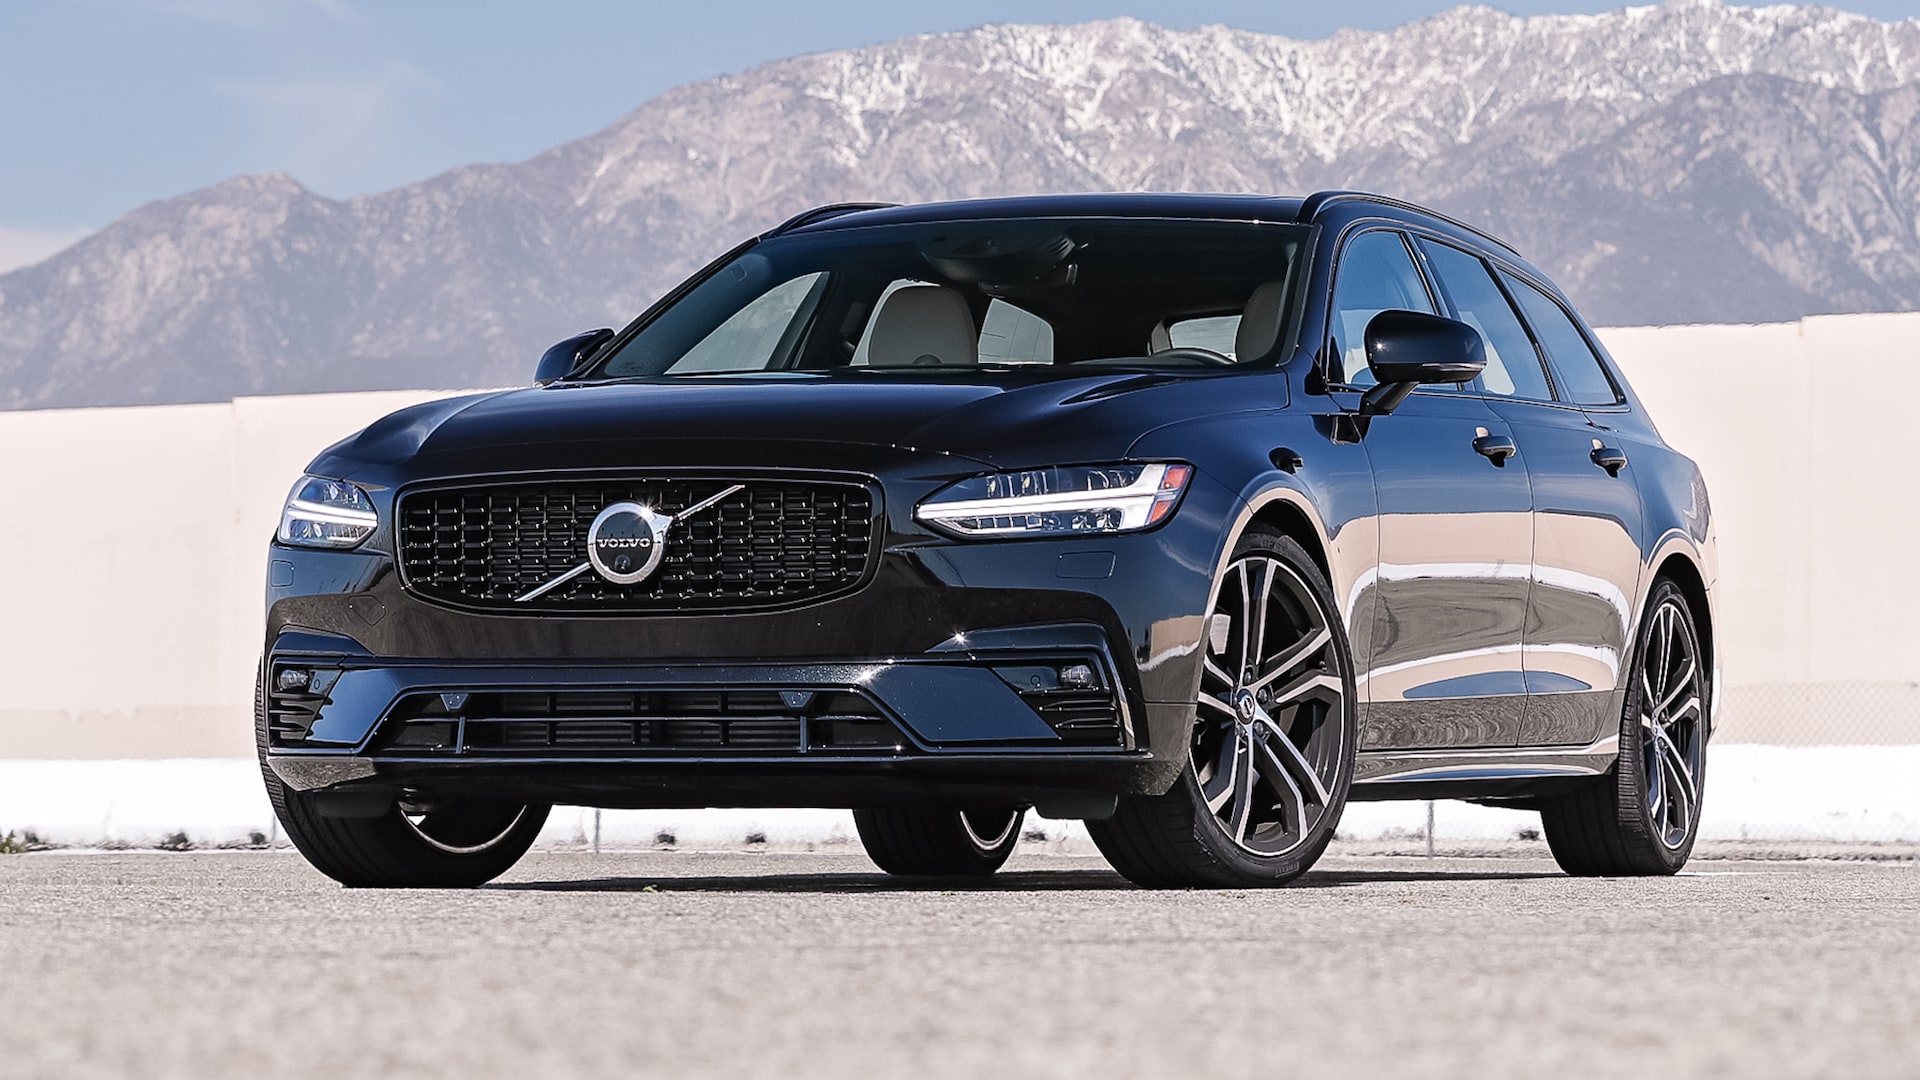 2021 Volvo V90 Prices, Reviews, and Photos - MotorTrend